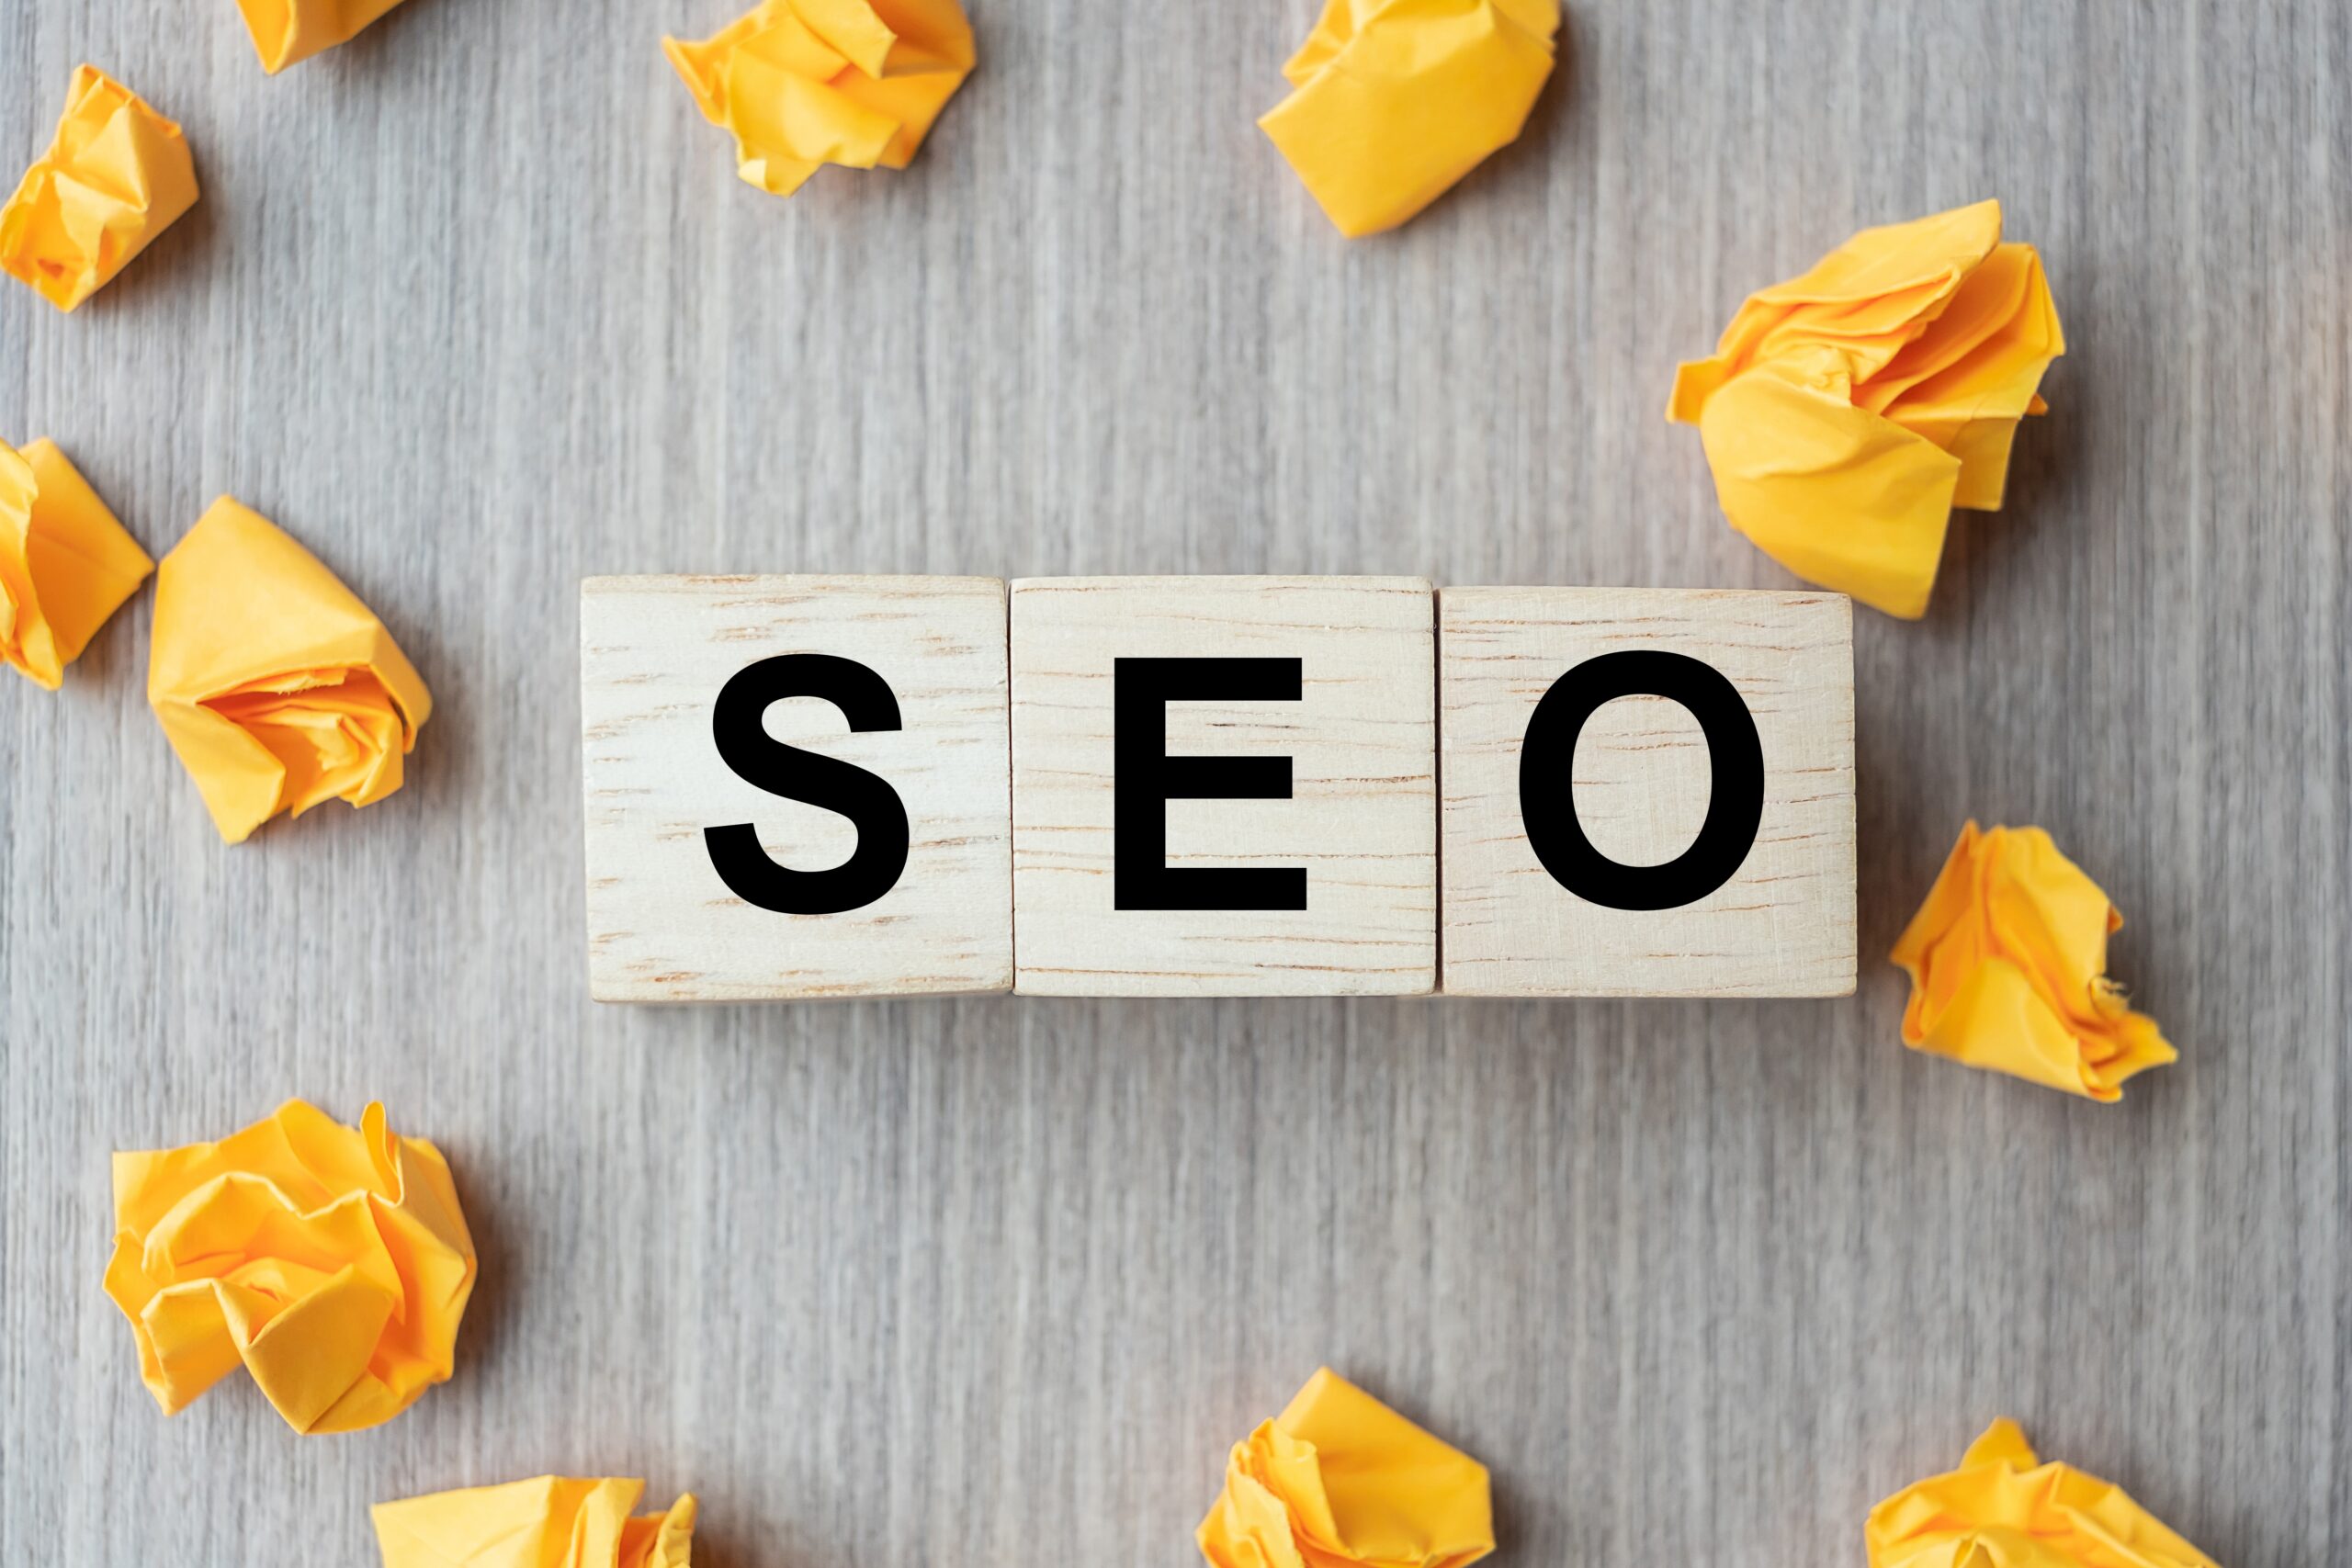 Three wooden blocks that spell out SEO.